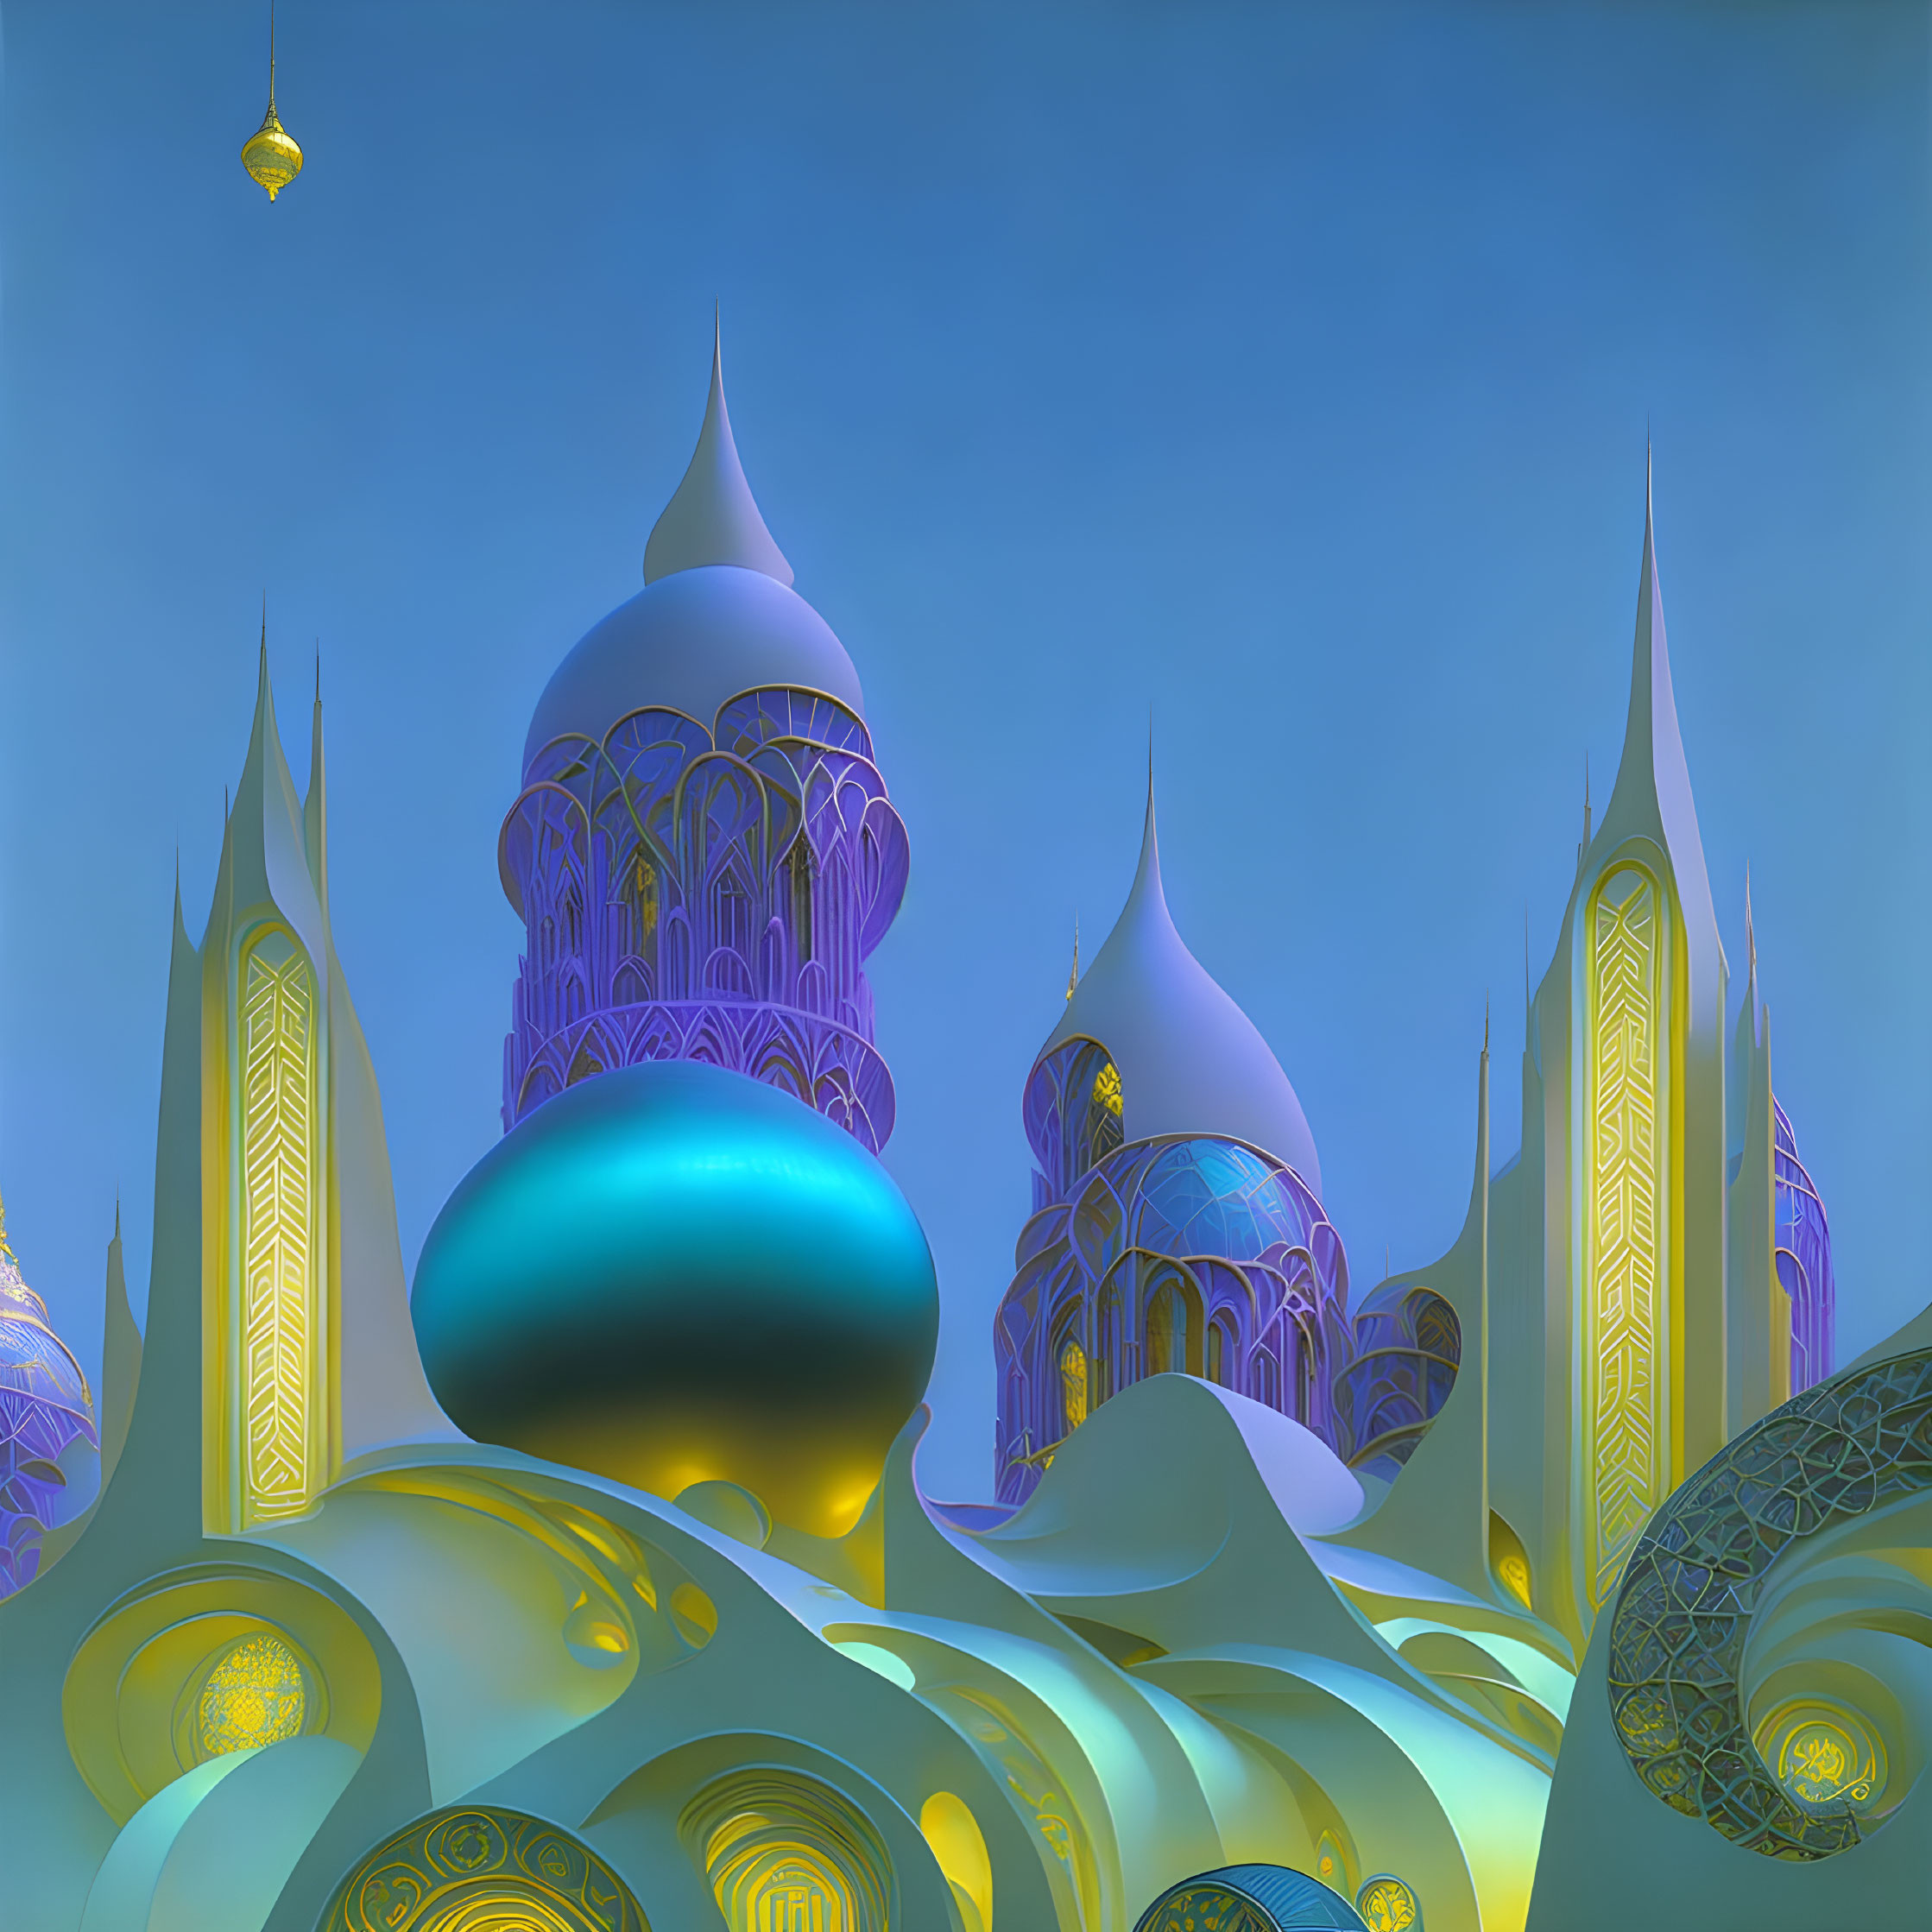 Whimsical Towers in Azure Sky